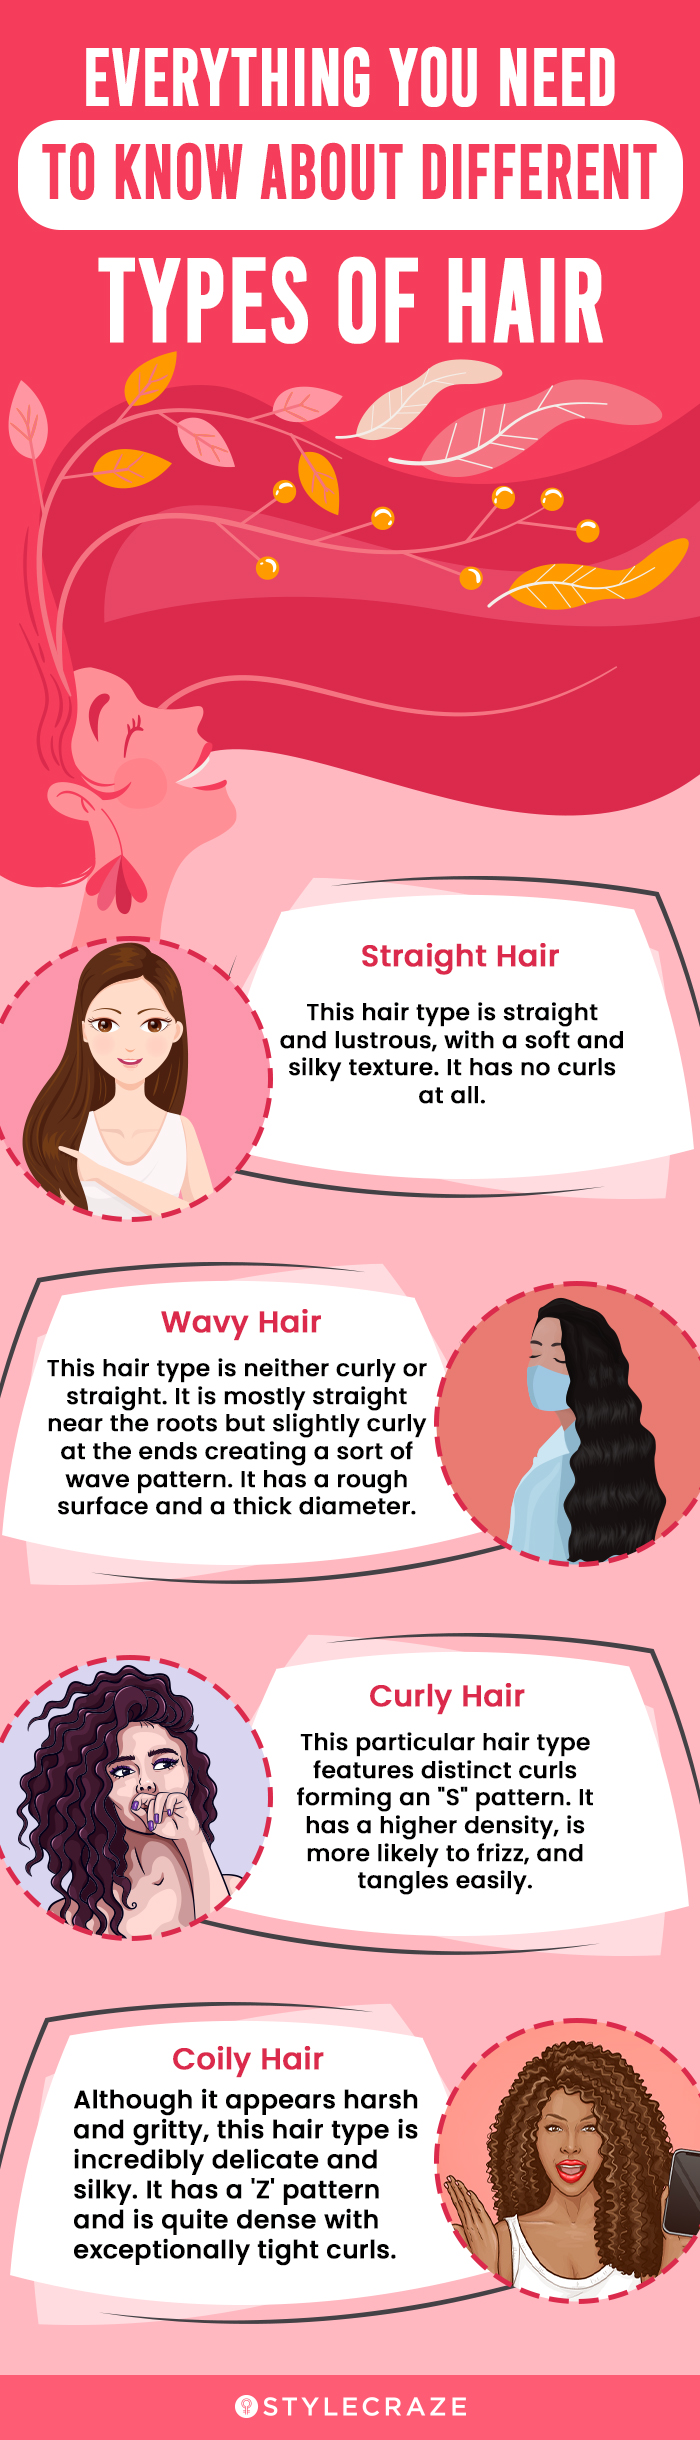 everything you need to know about different types of hair (infographic)